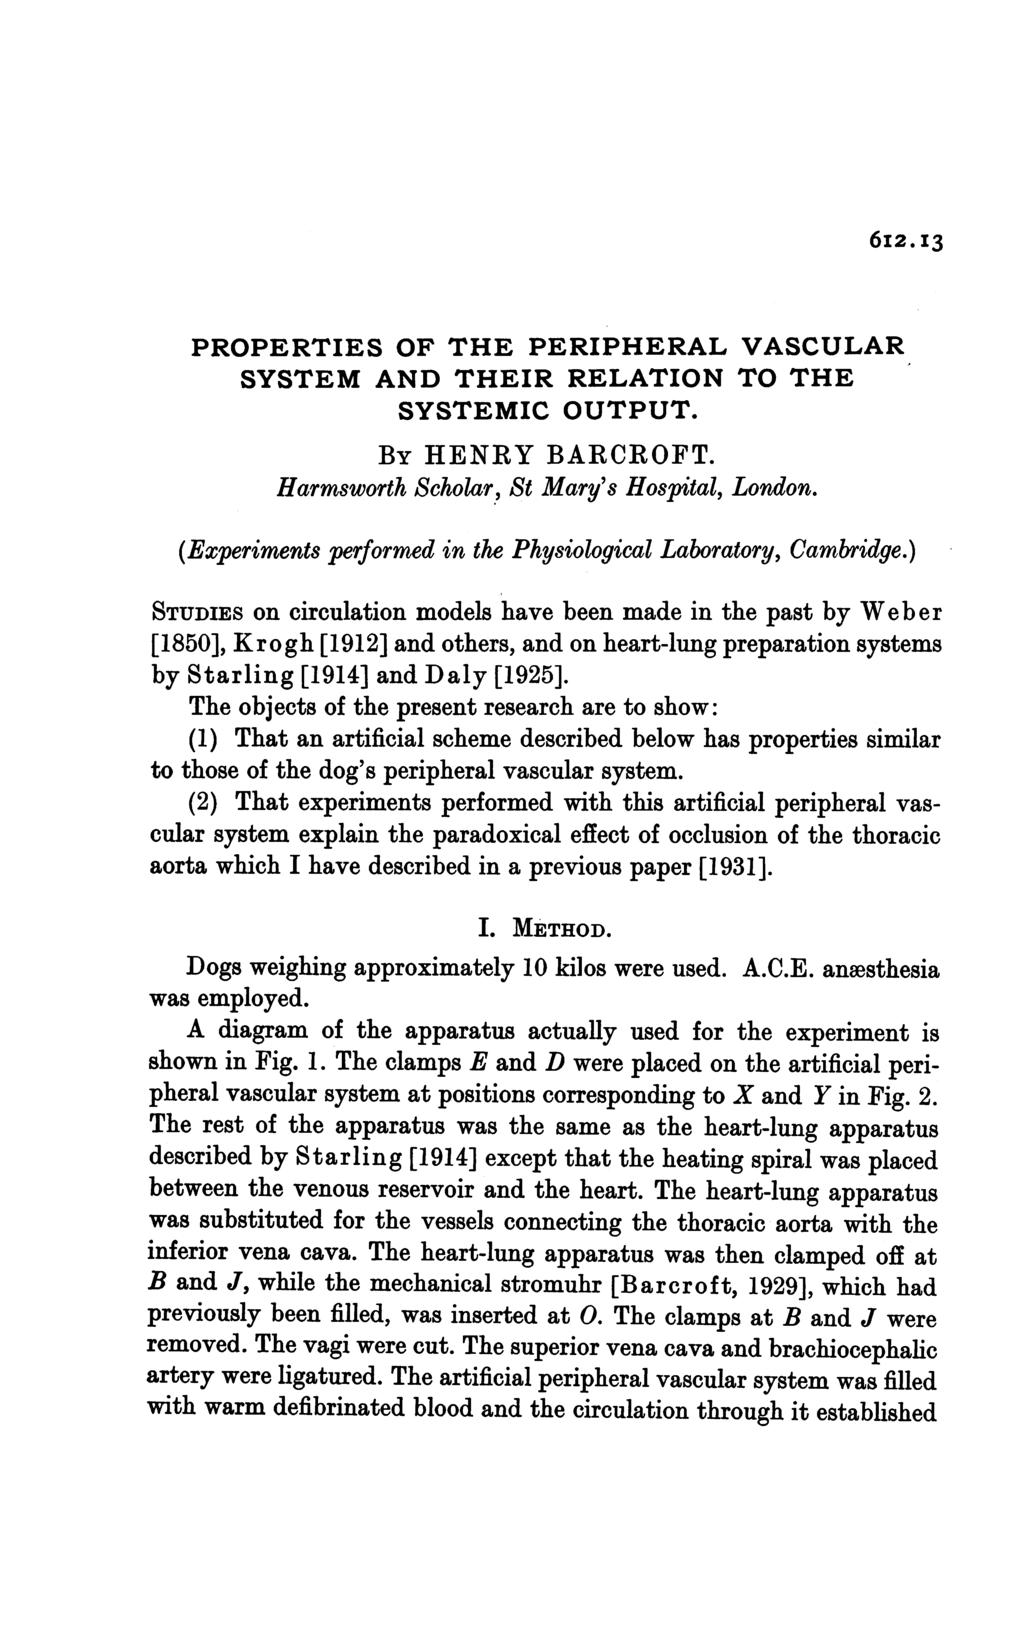 612.13 PROPERTIES OF THE PERIPHERAL VASCULAR SYSTEM AND THEIR RELATION TO THE SYSTEMIC OUTPUT. BY HENRY BARCROFT. Harmsworth Scholar, St Mary's Hospital, London.